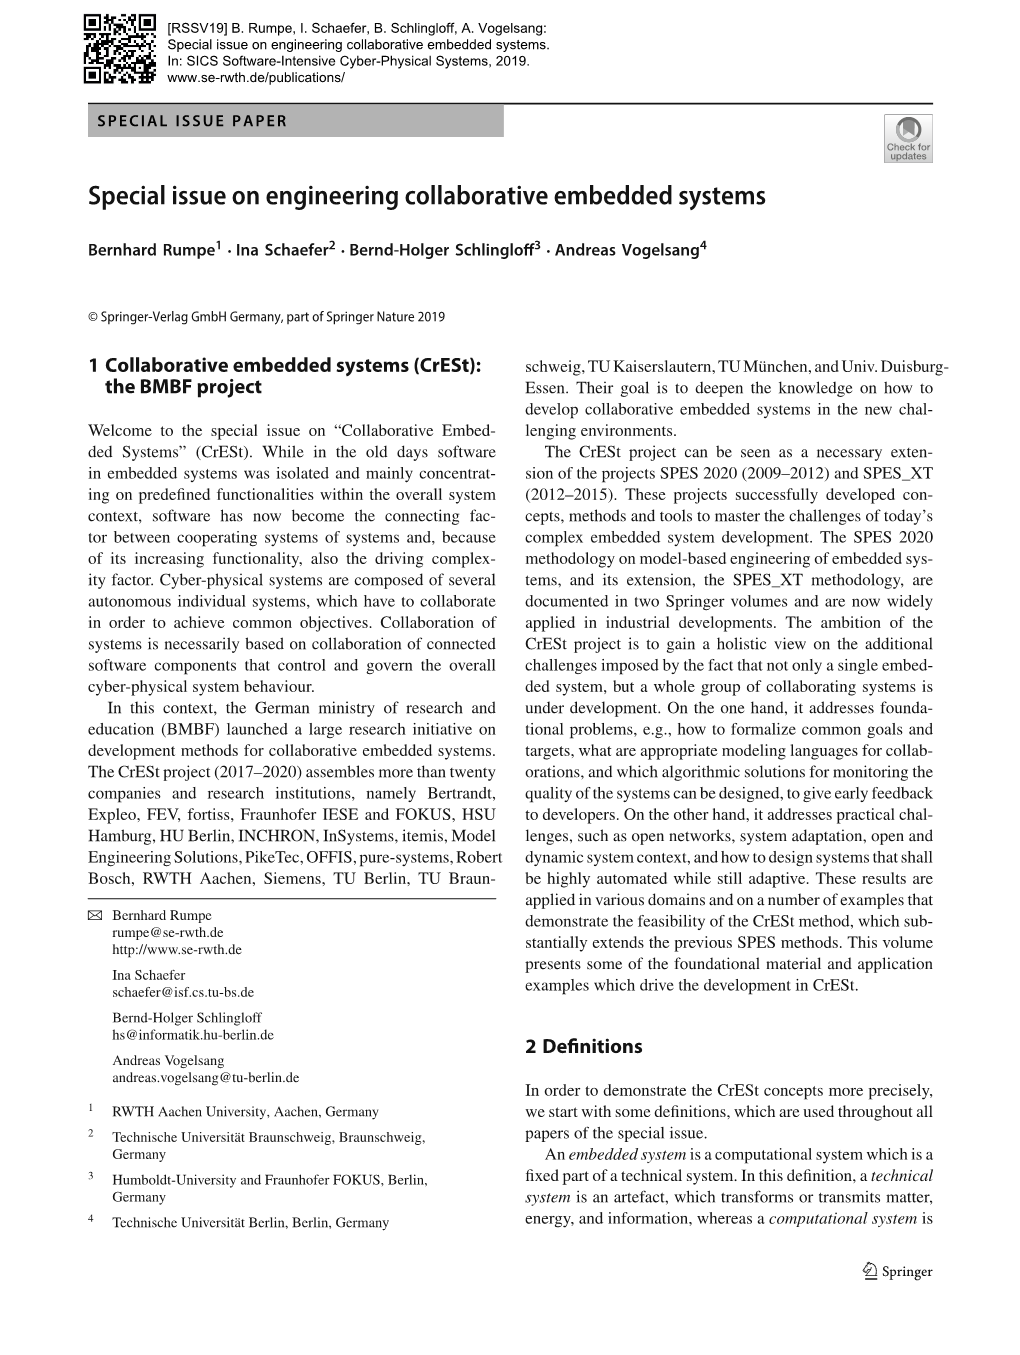 Special Issue on Engineering Collaborative Embedded Systems